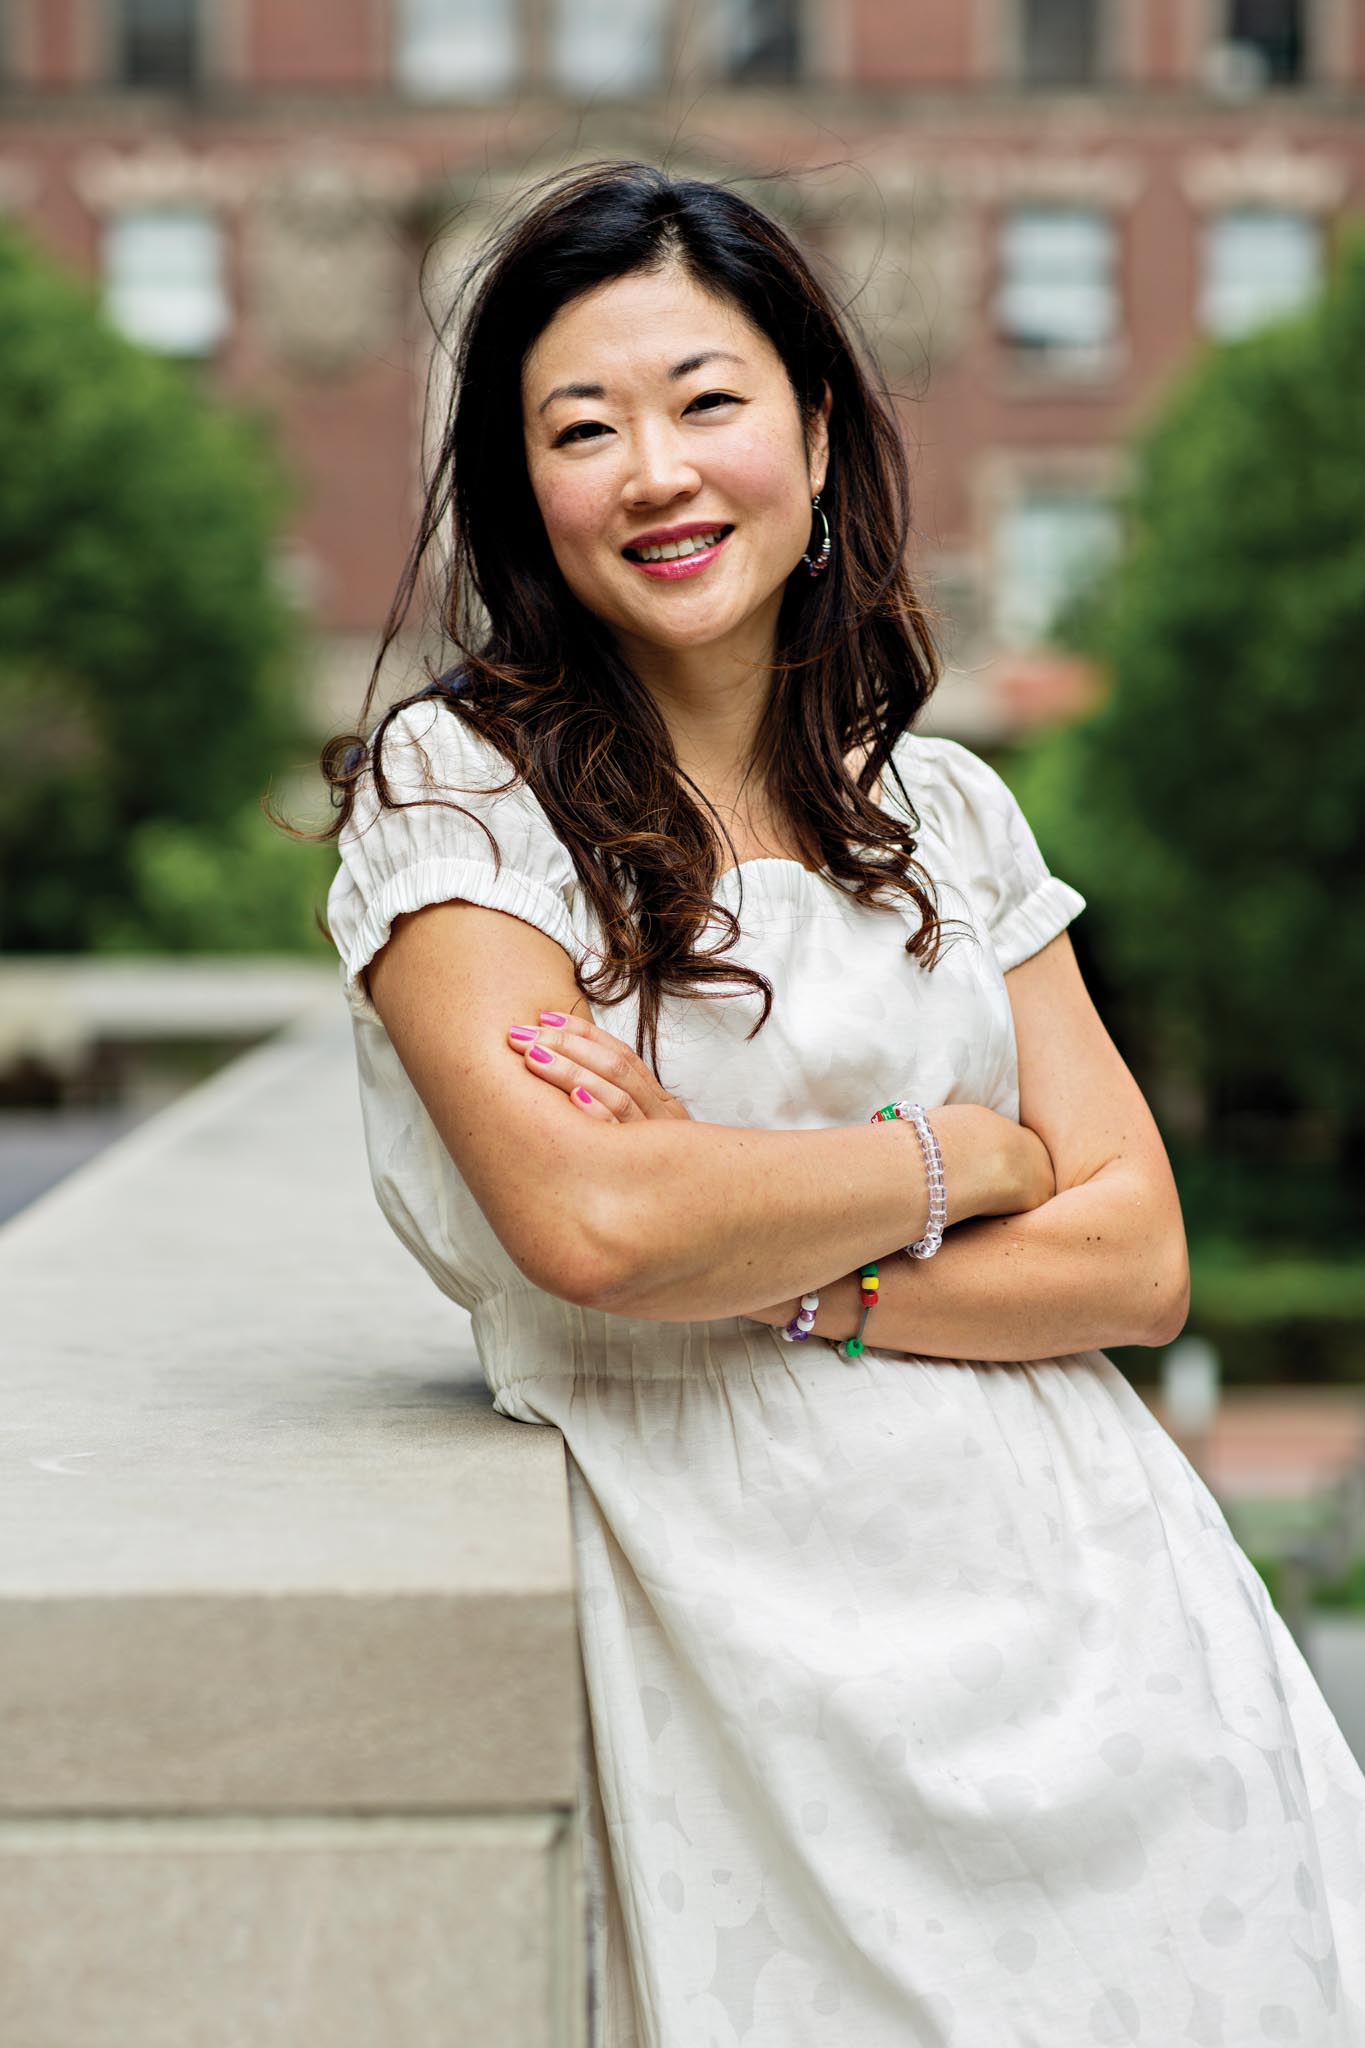 Sooji Park headshot on campus. She is wearing a white dress and has her arms crossed